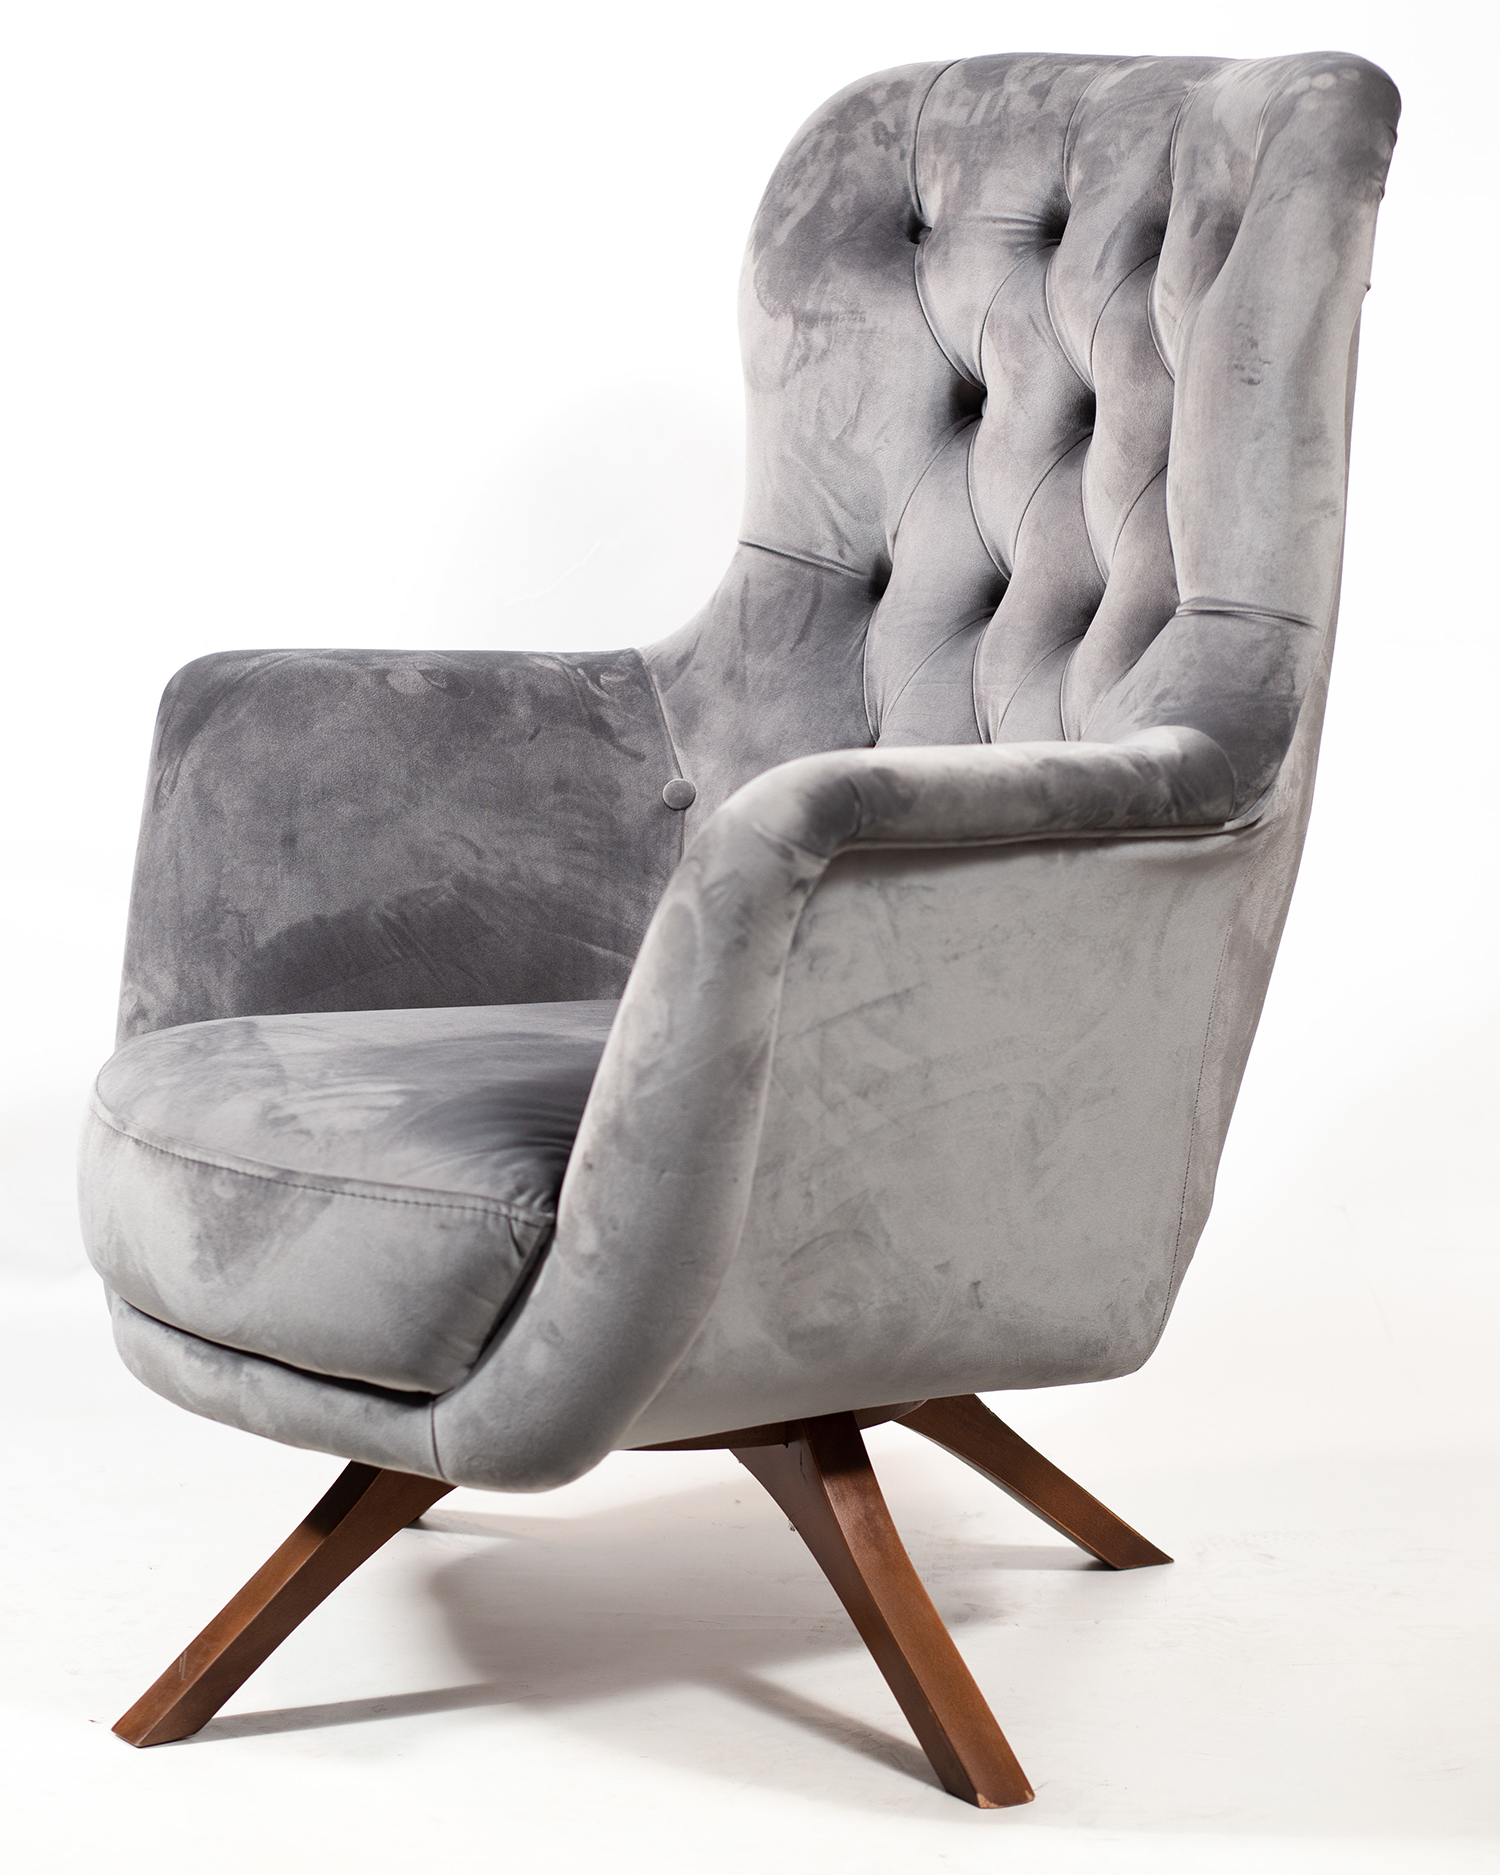 Demo product furniture seat gray classic